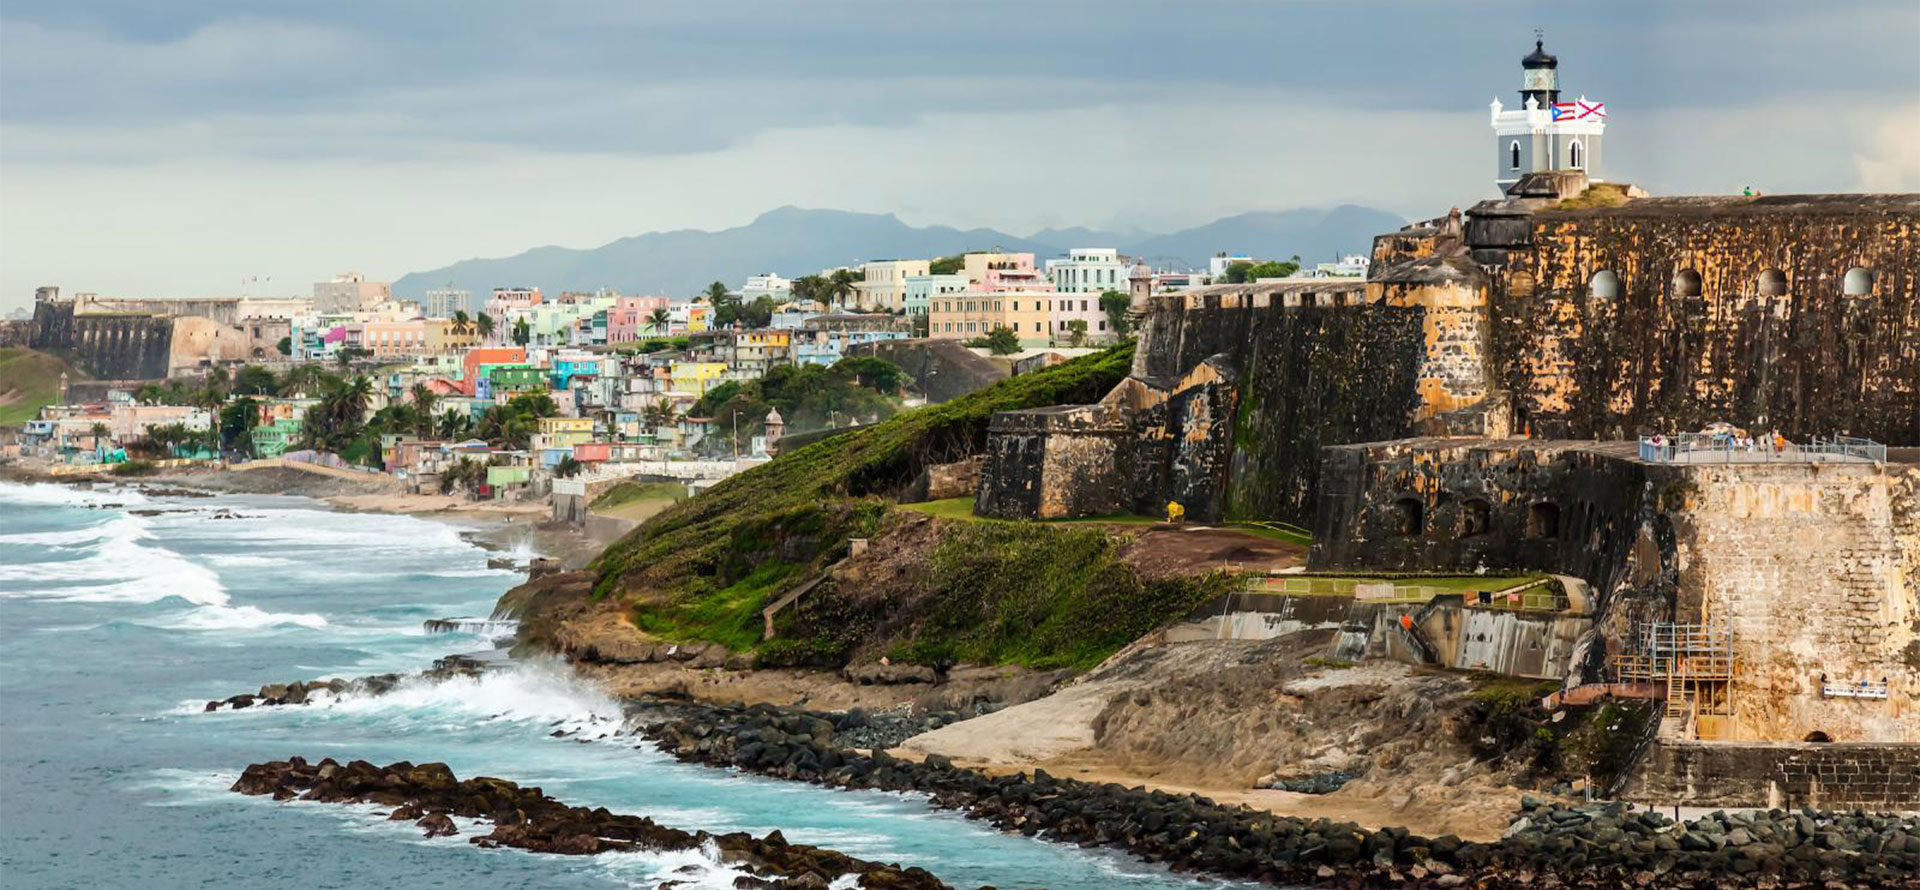 Puerto rico  all-inclusive adults only resort with big waves.